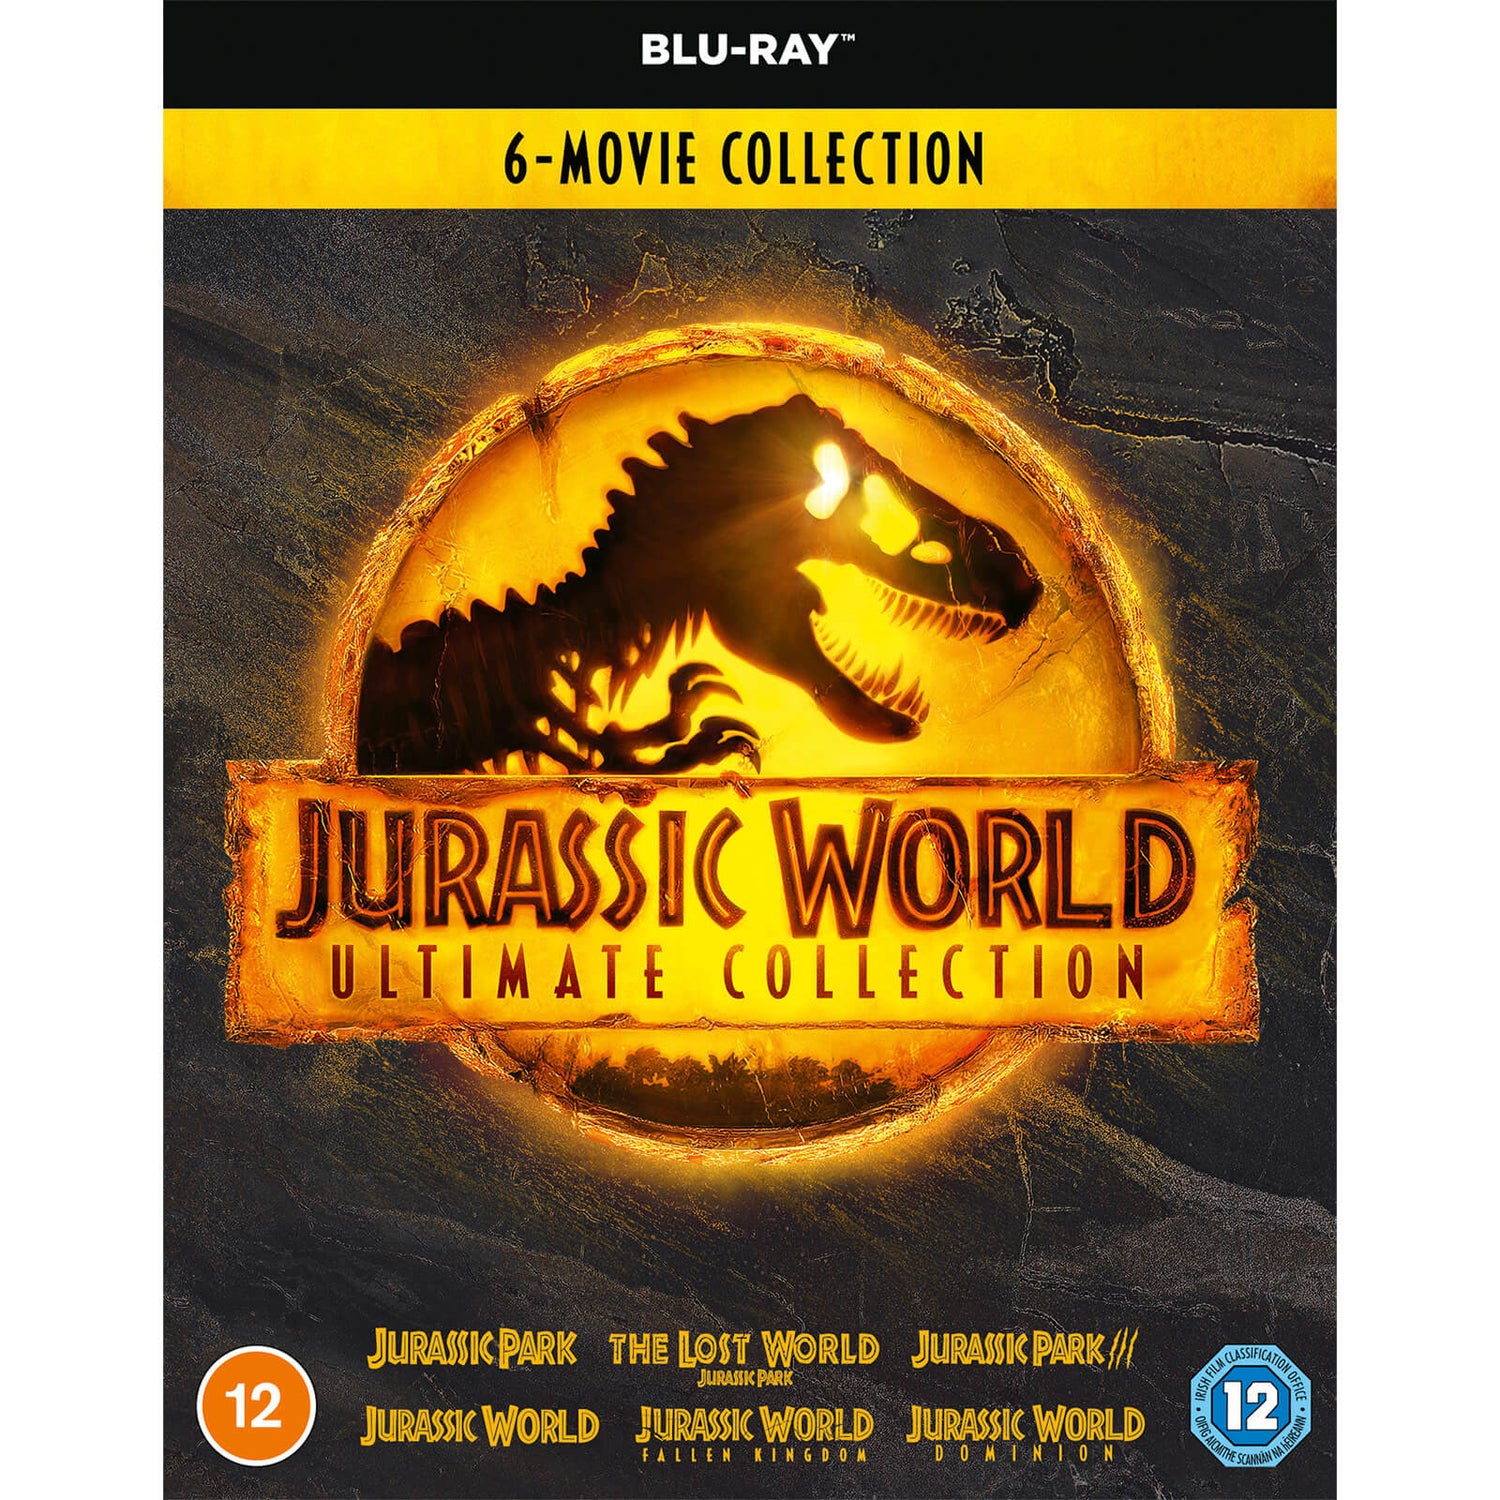 Jurassic World Ultimate Collection